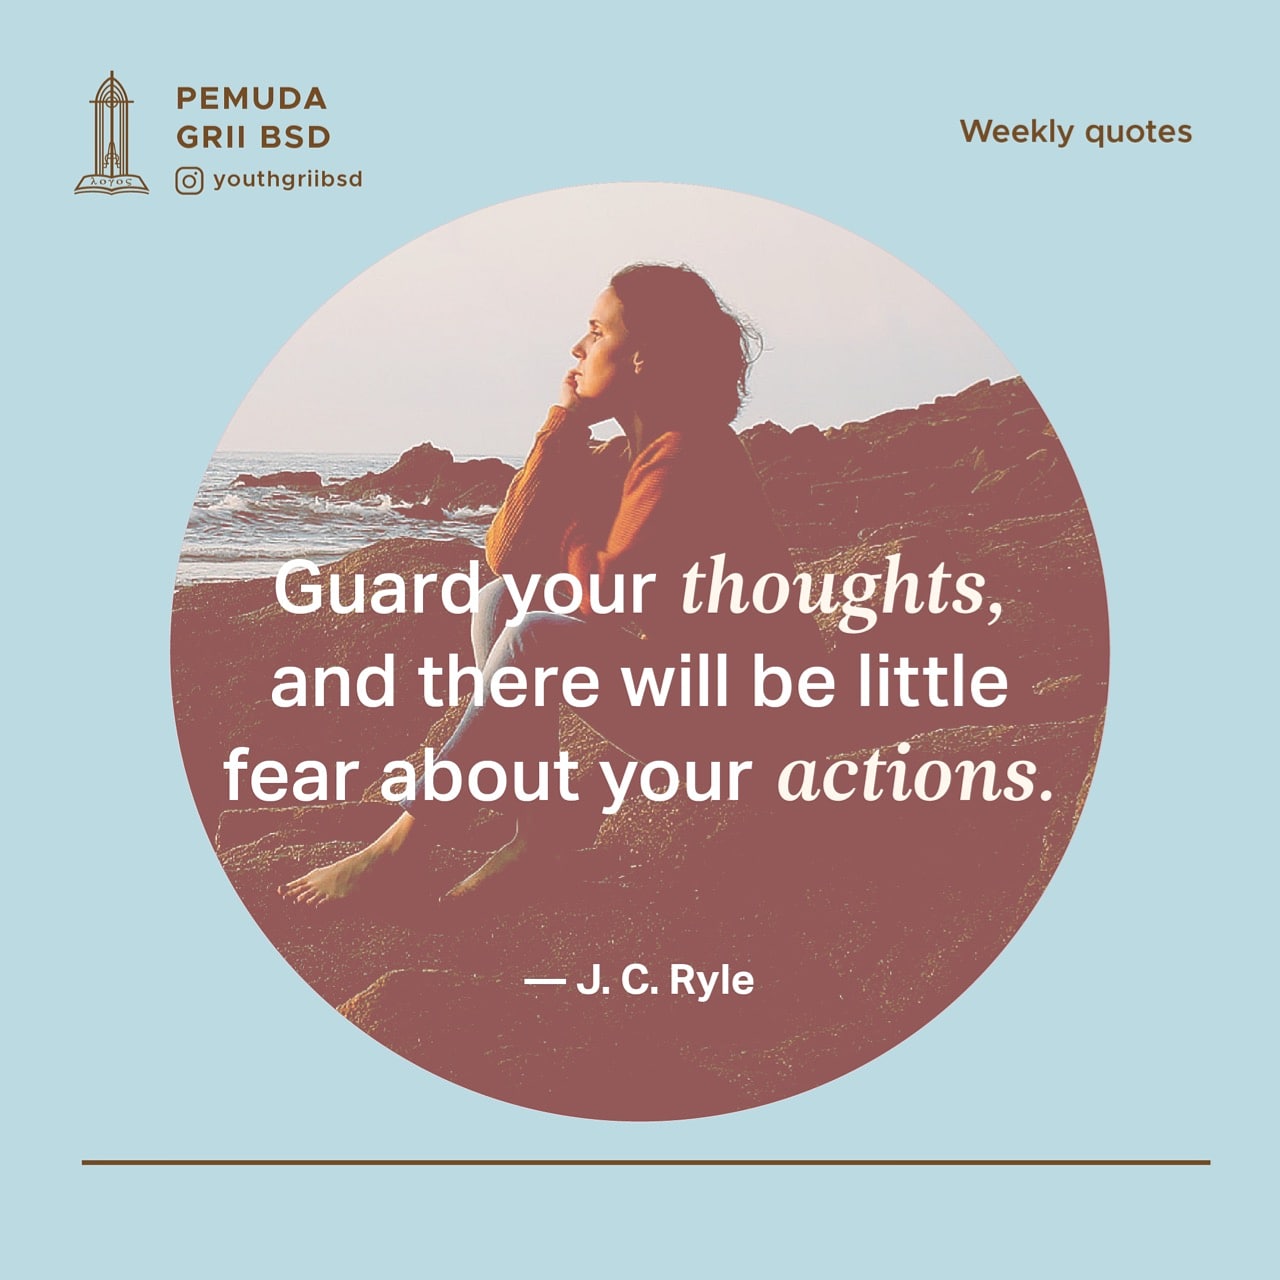 Guard your thoughts, and there will be little fear about your actions